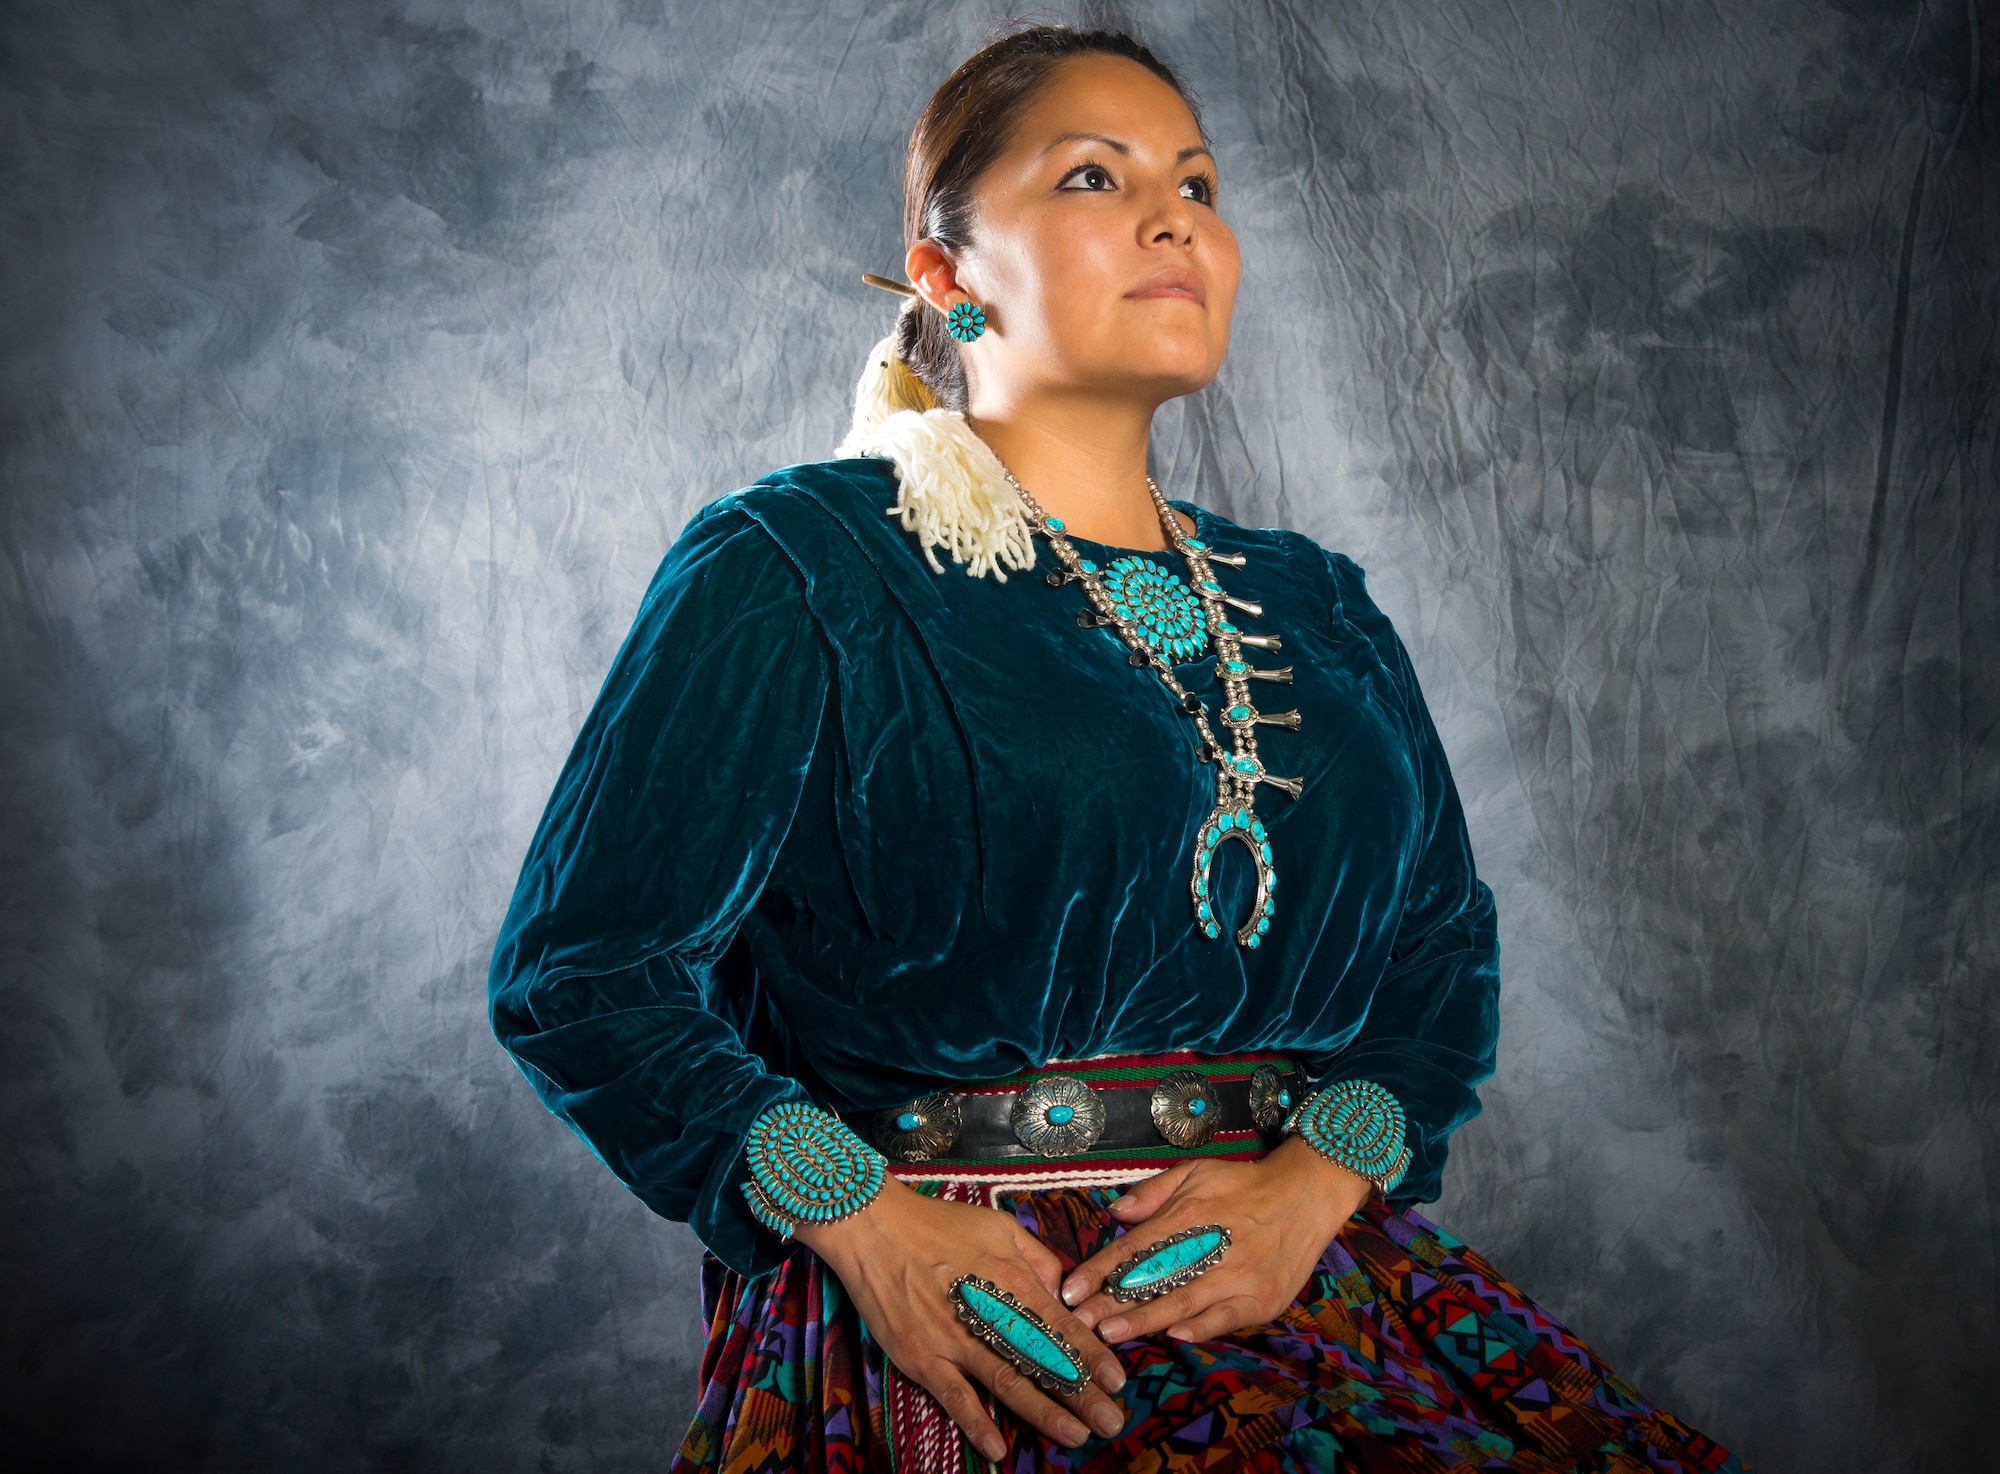 Tech. Sgt. April Cooper, 23d Wing command section superintendent, poses wearing her traditional Navajo dress at Moody Air Force Base, Ga., Nov. 27, 2012. November is Native American Heritage Month, which honors and celebrates the many contributions Native Americans have made and continue to make to the U.S. (U.S. Air Force photo/Senior Airman Douglas Ellis/Released) 
